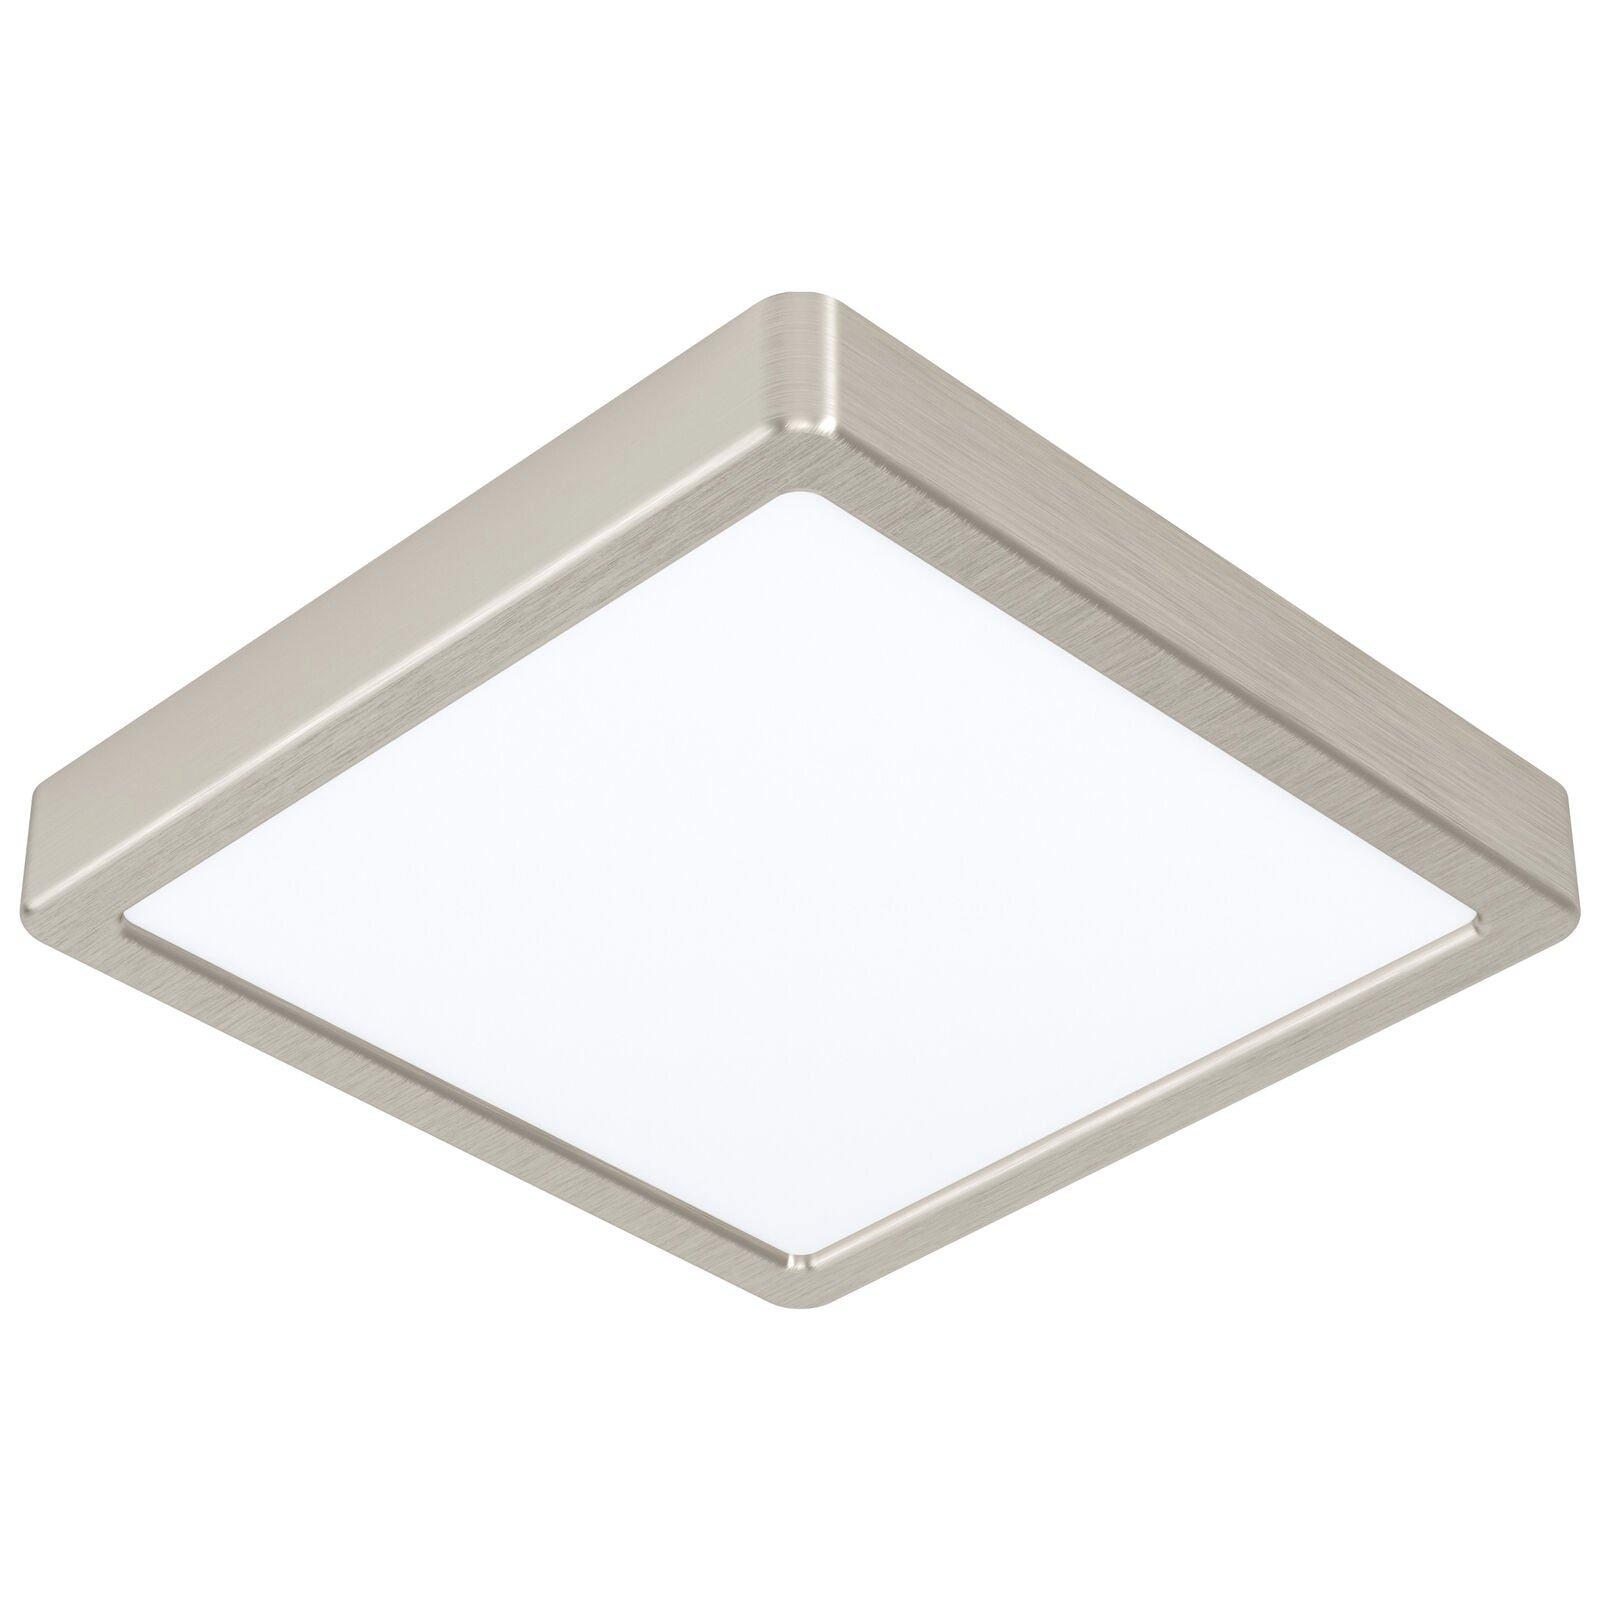 Wall / Ceiling Light Satin Nickel 210mm Square Surface Mounted 16.5W LED 4000K